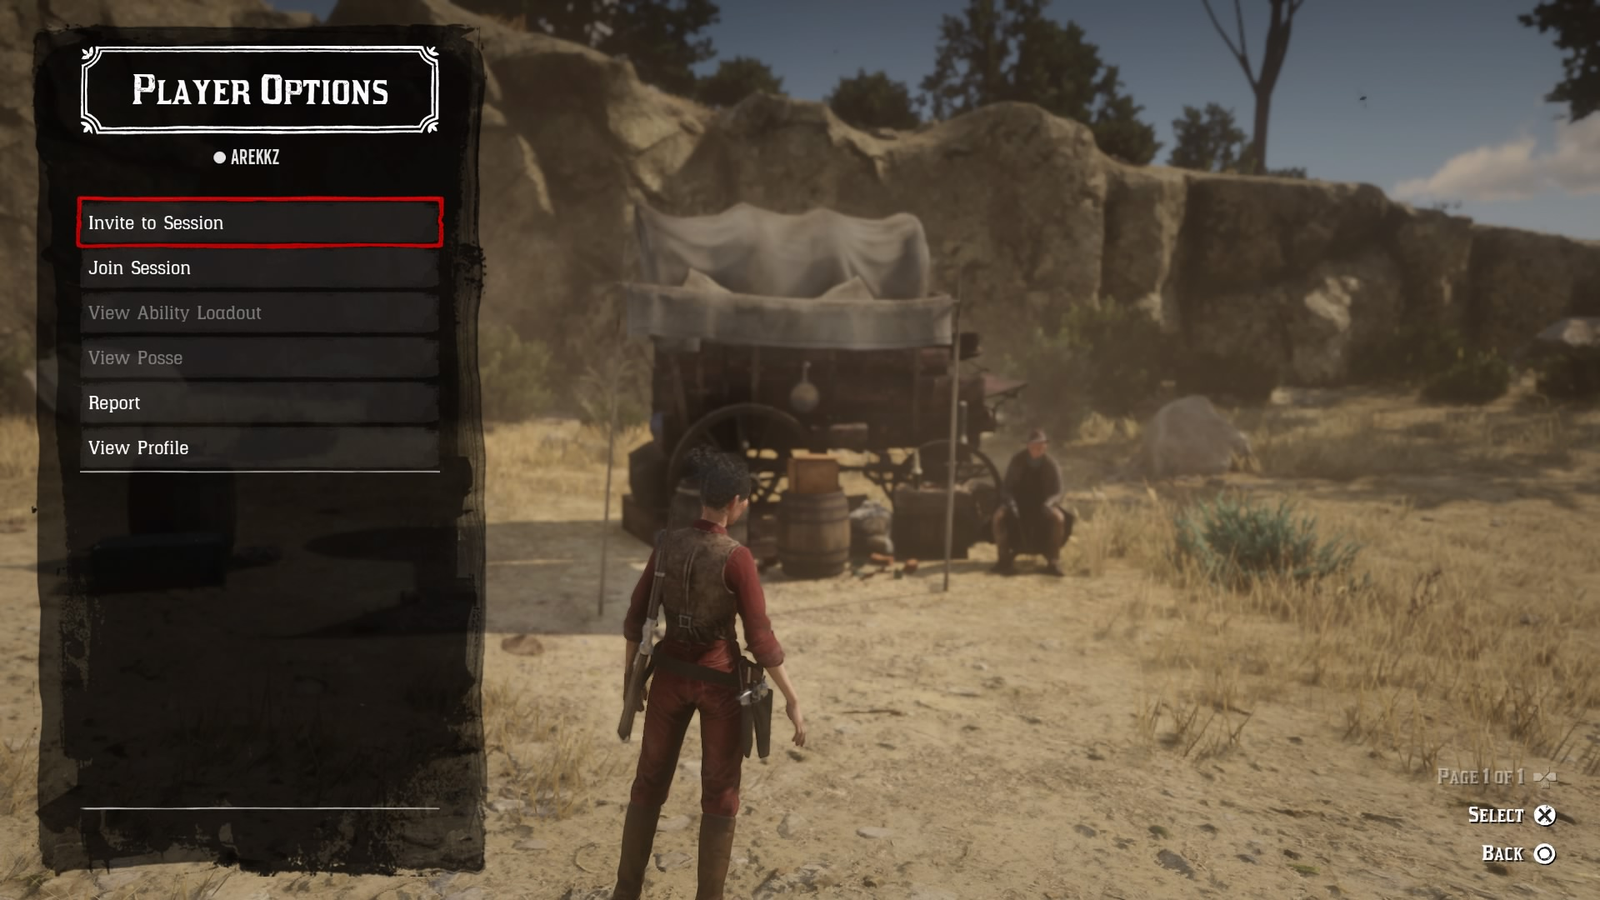 Red Dead Redemption 2 Online + Story(PS4 & PS5 Only)